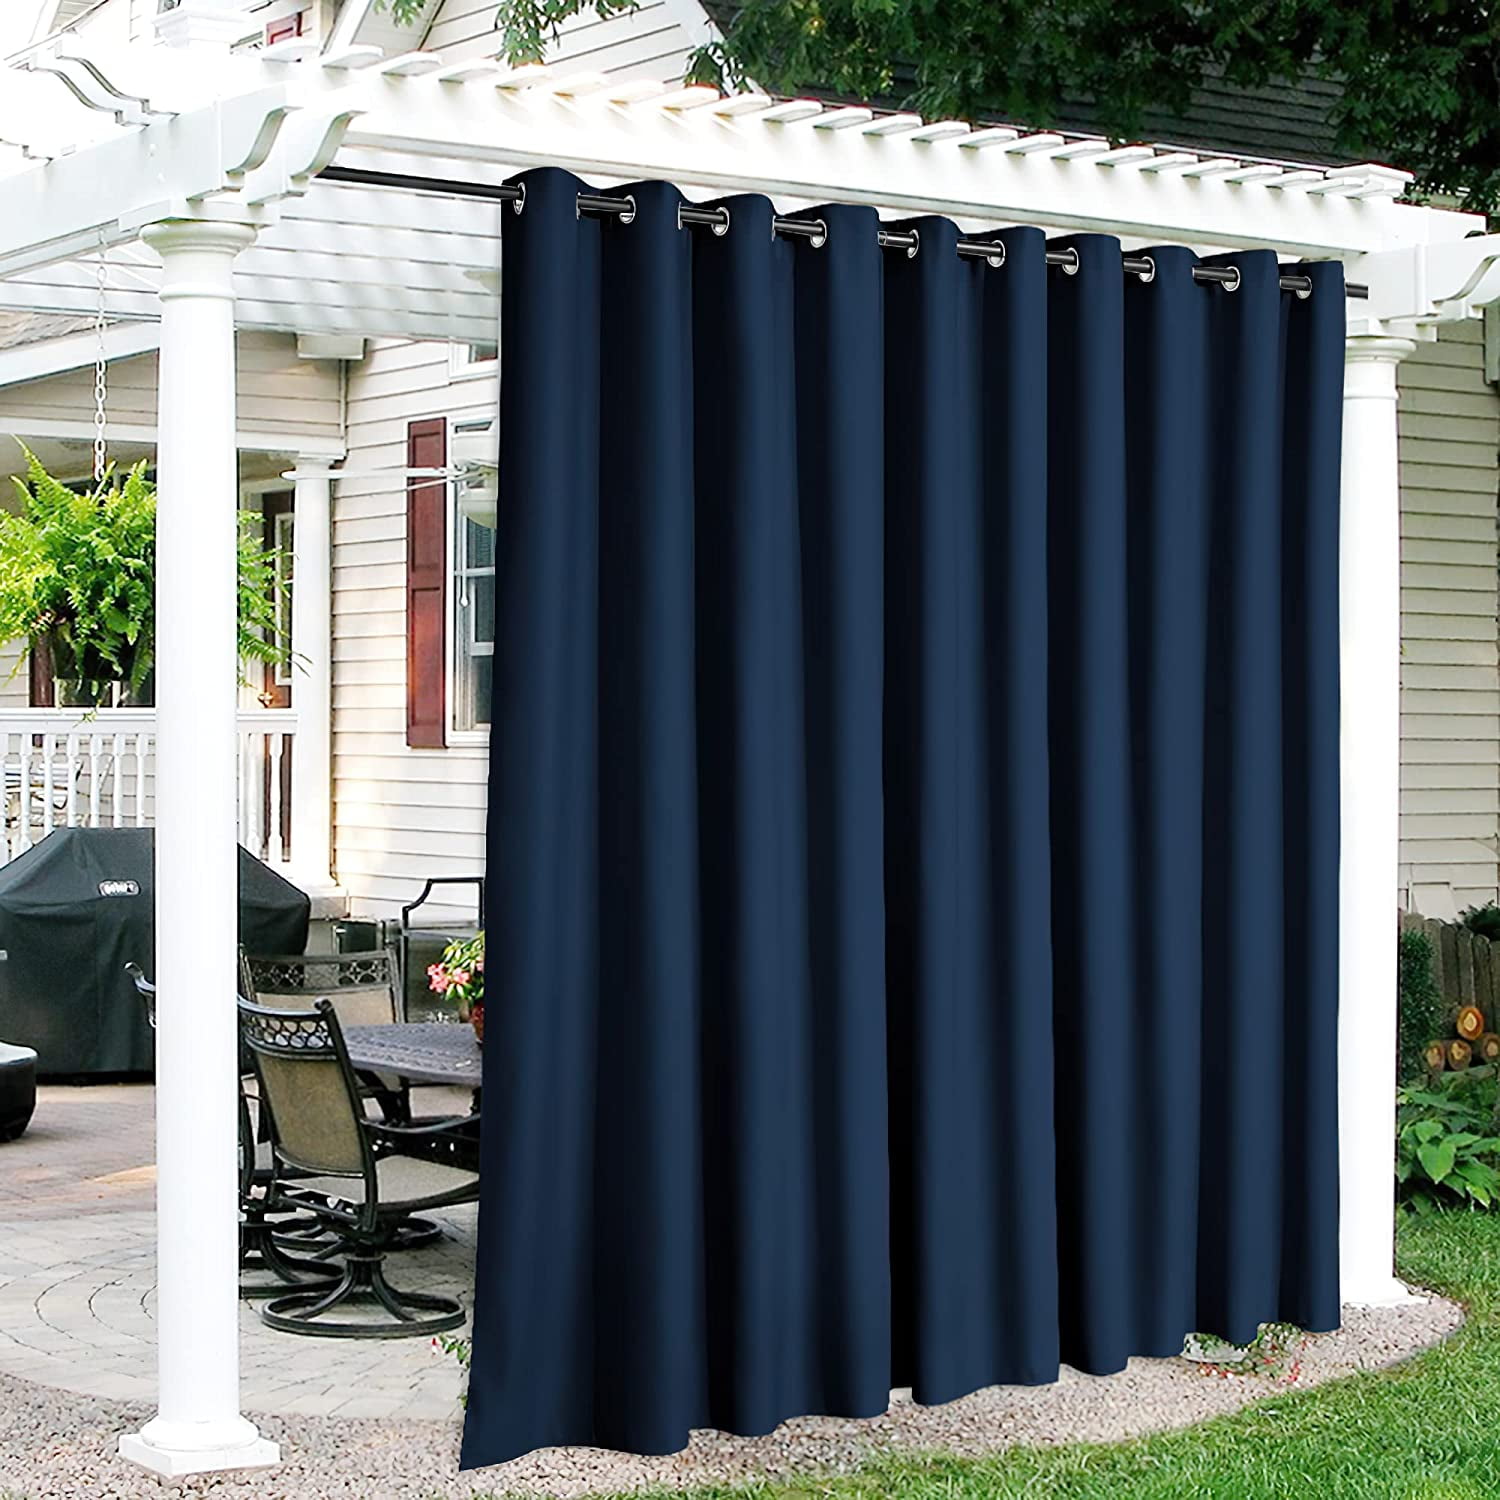 Pair of Outdoor Curtains Stainless Steel Eyelets Knitted Privacy Shade Balcony 